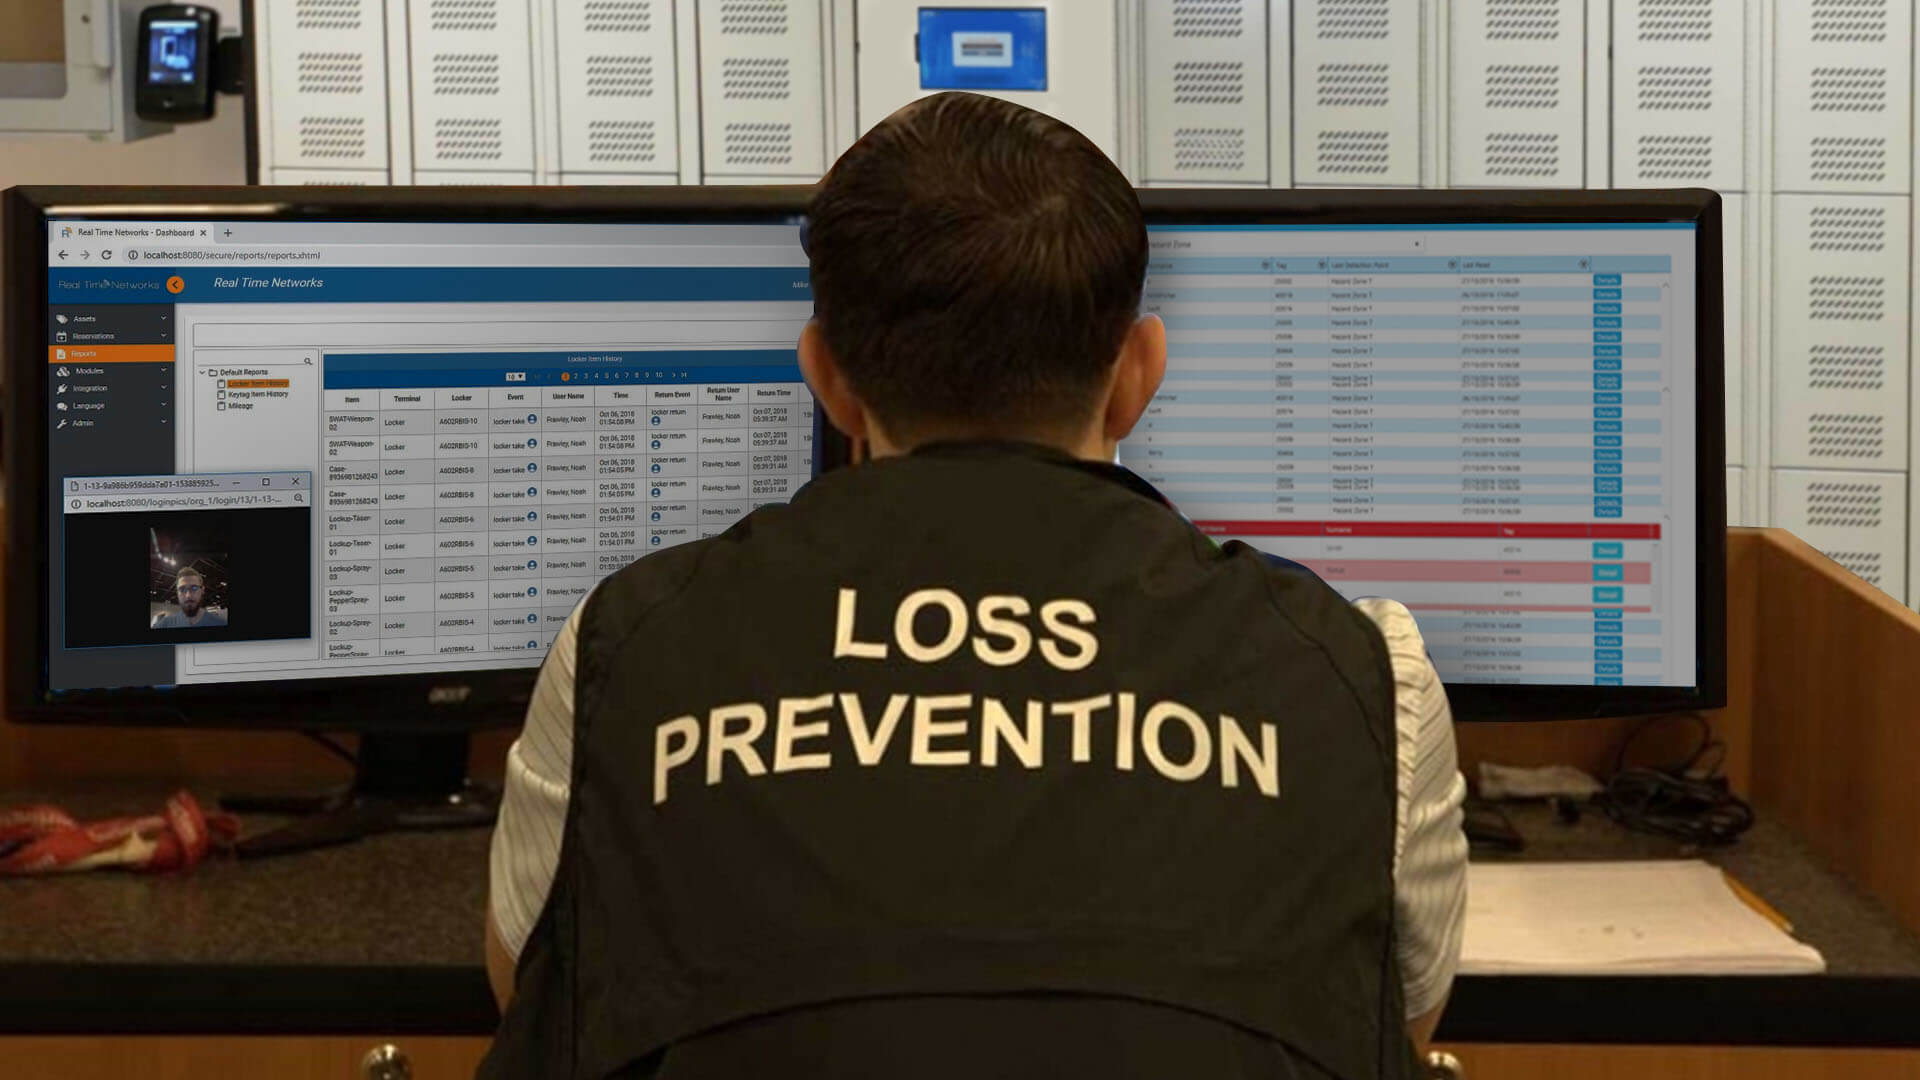 Loss prevention administrator monitoring business assets.